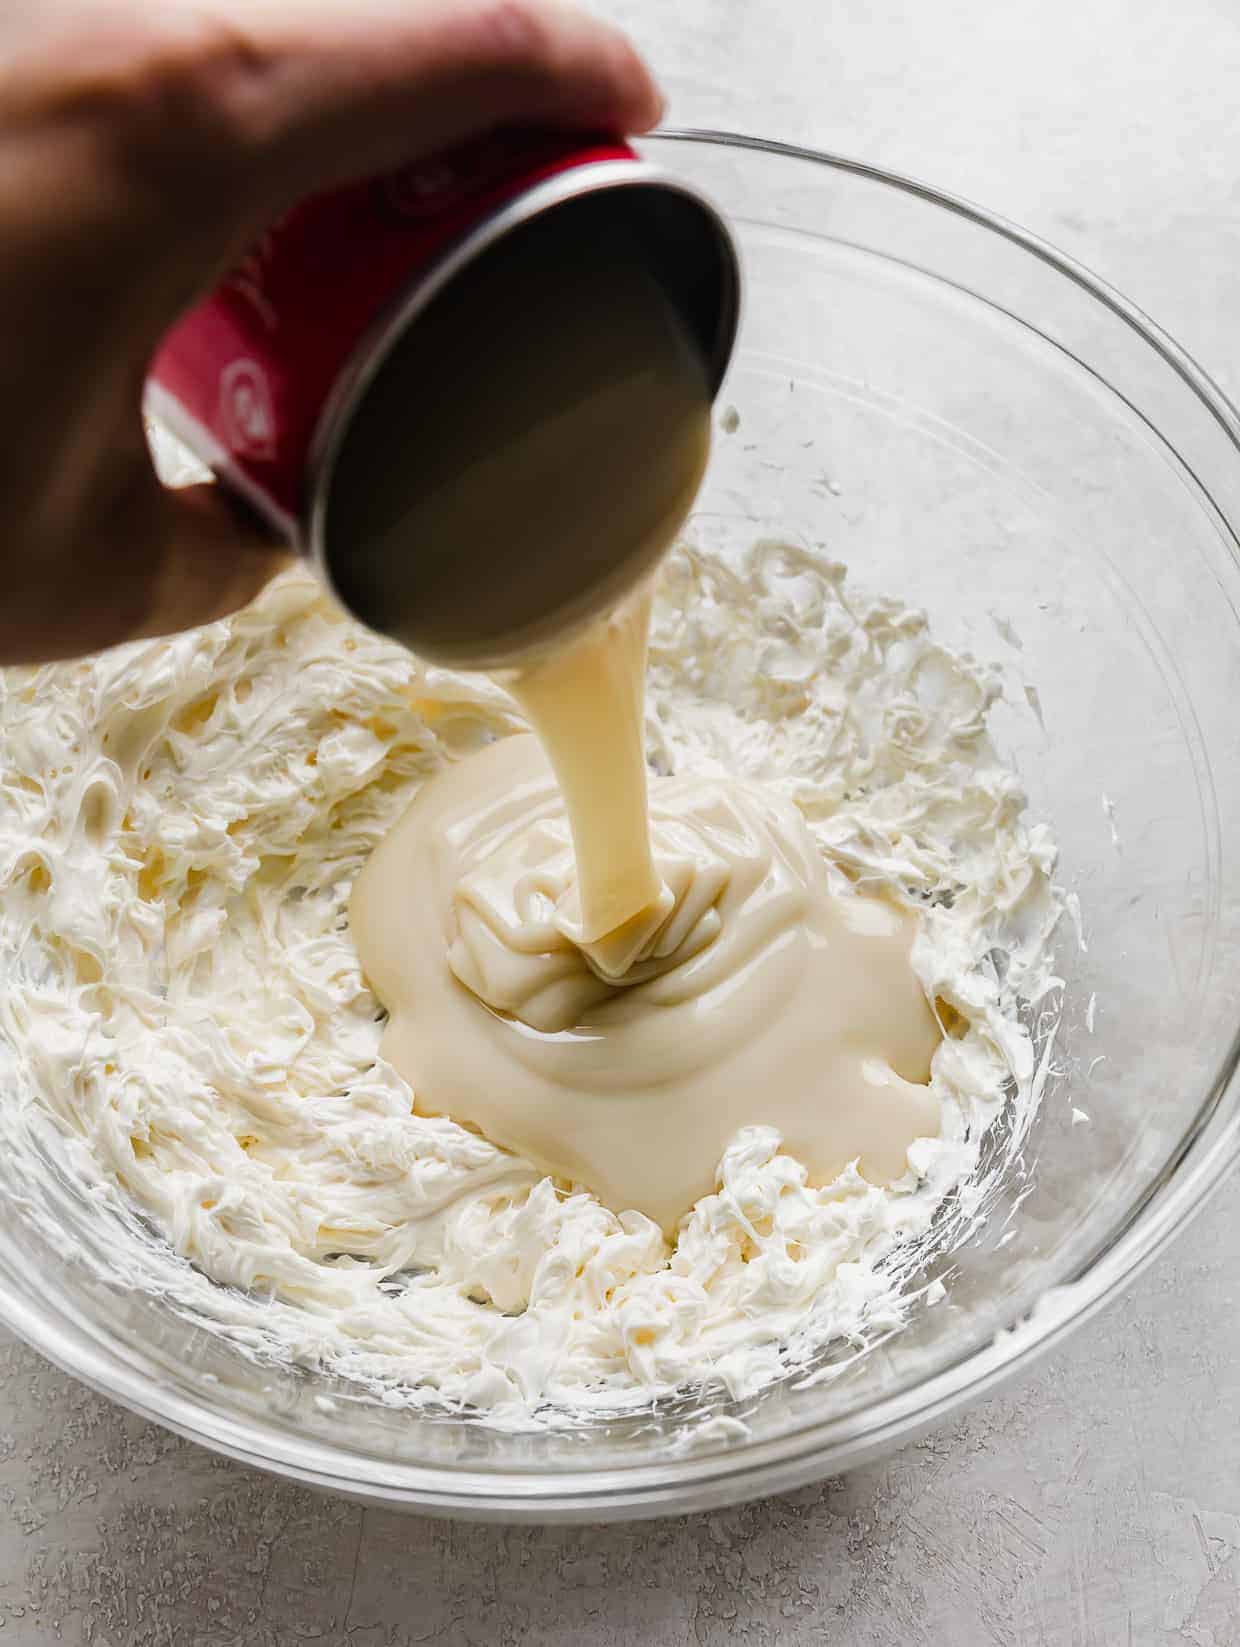 A hand pouring a can of sweetened condensed milk into a glass bowl.